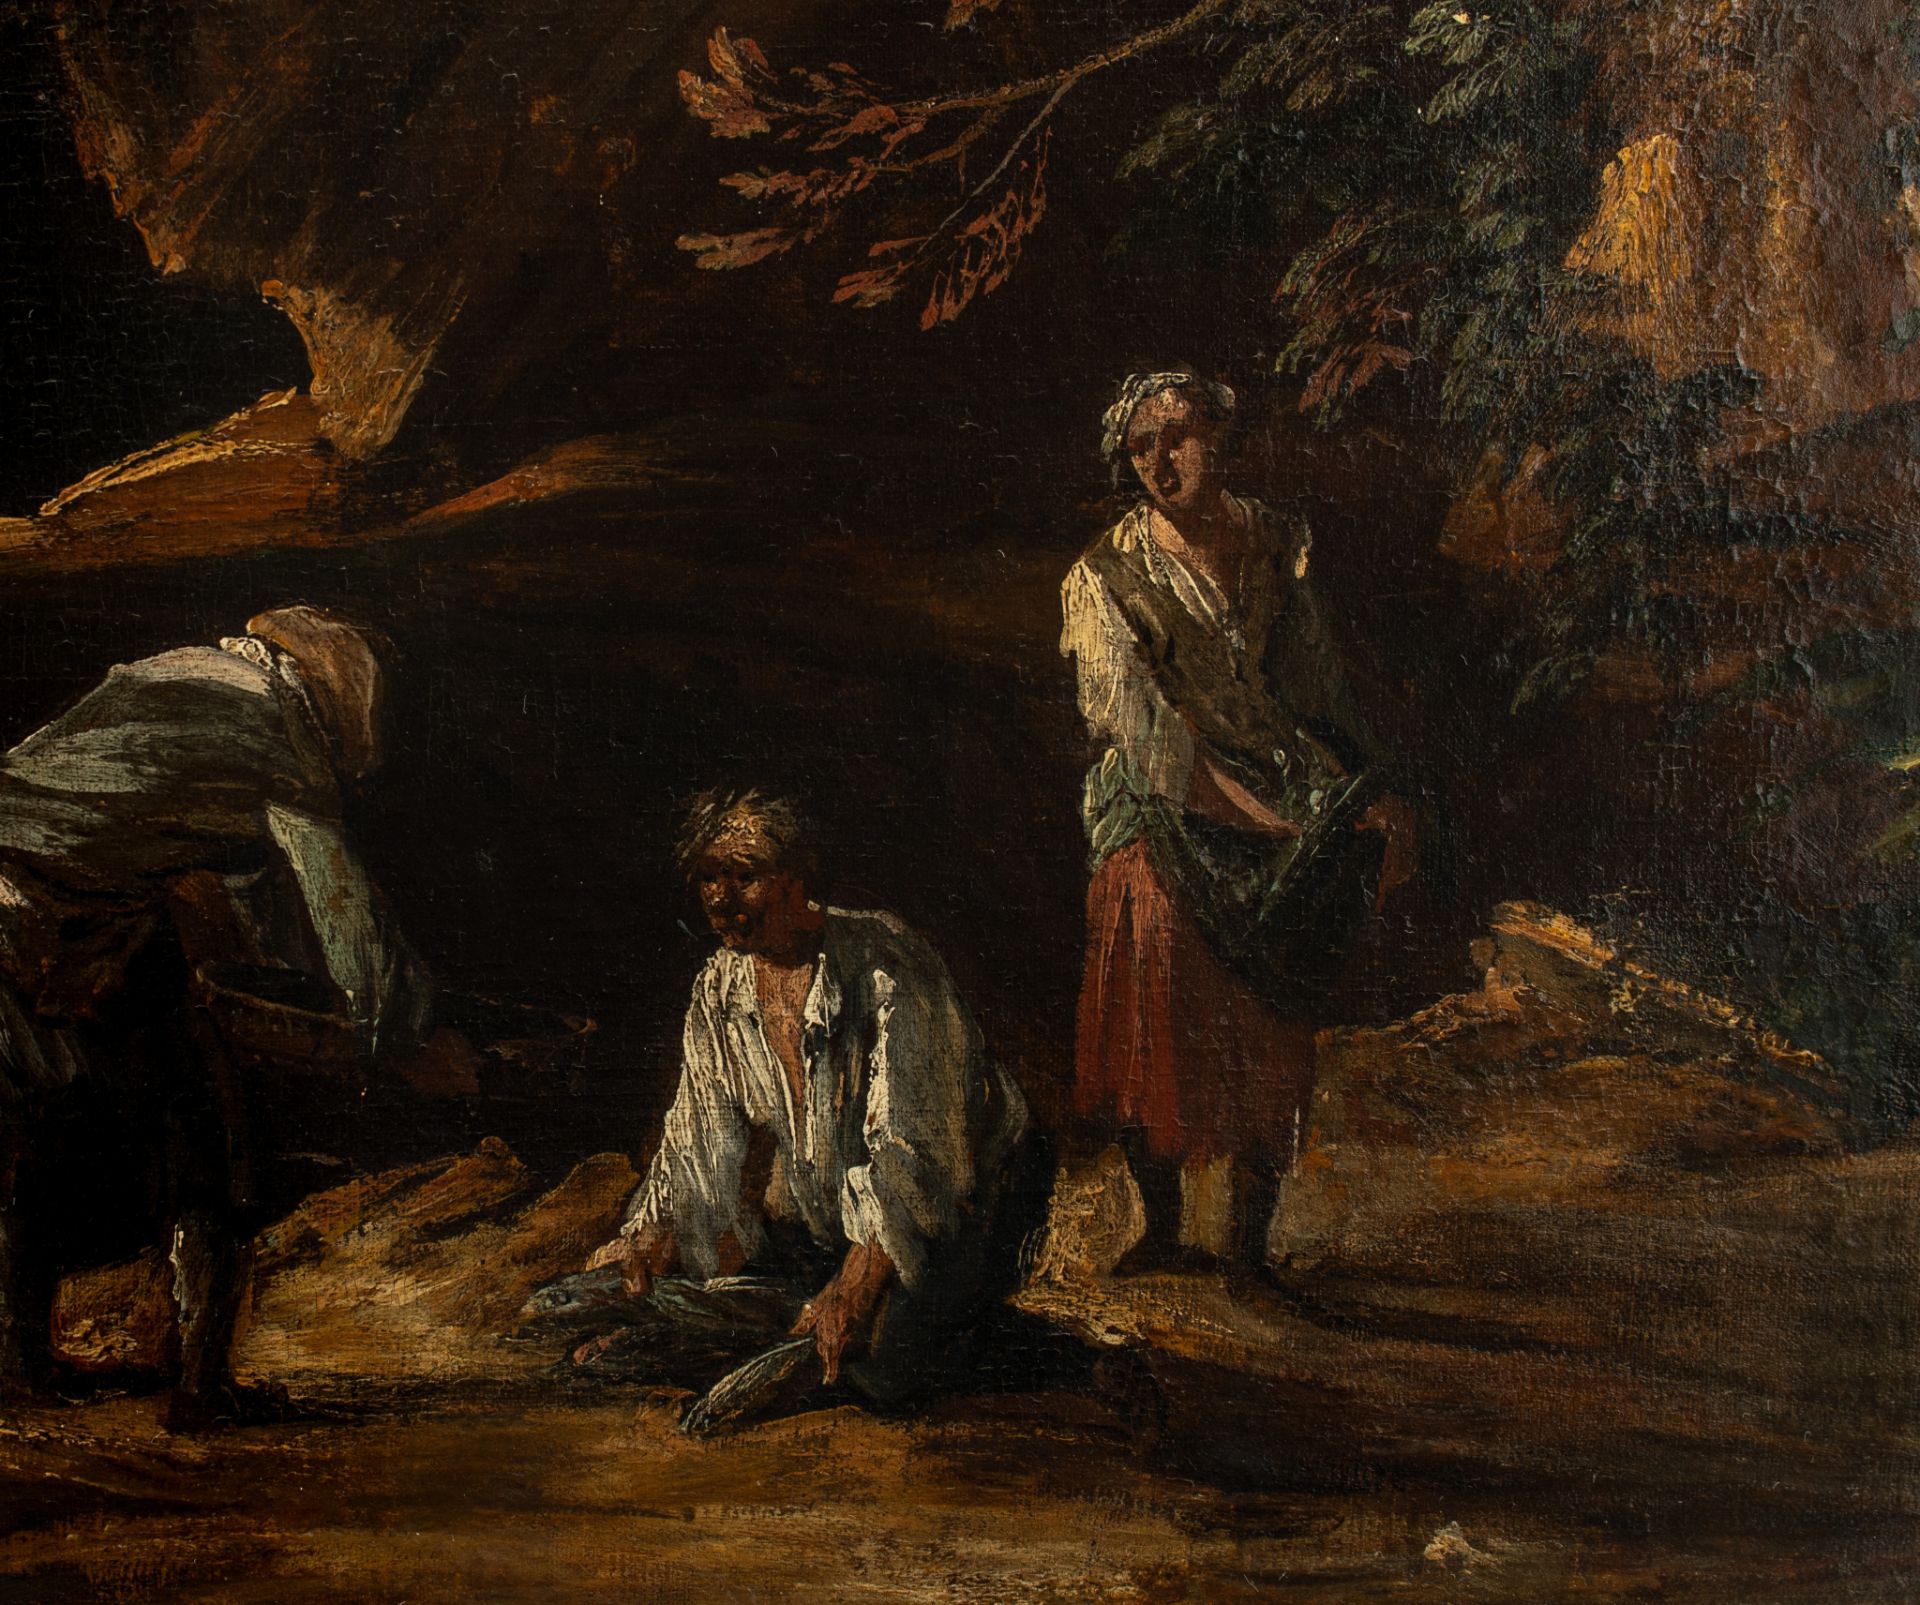 Attributed to Salvator Rosa (1615-1673), the golddiggers, oil on canvas, 120 x 140 cm - Bild 4 aus 8